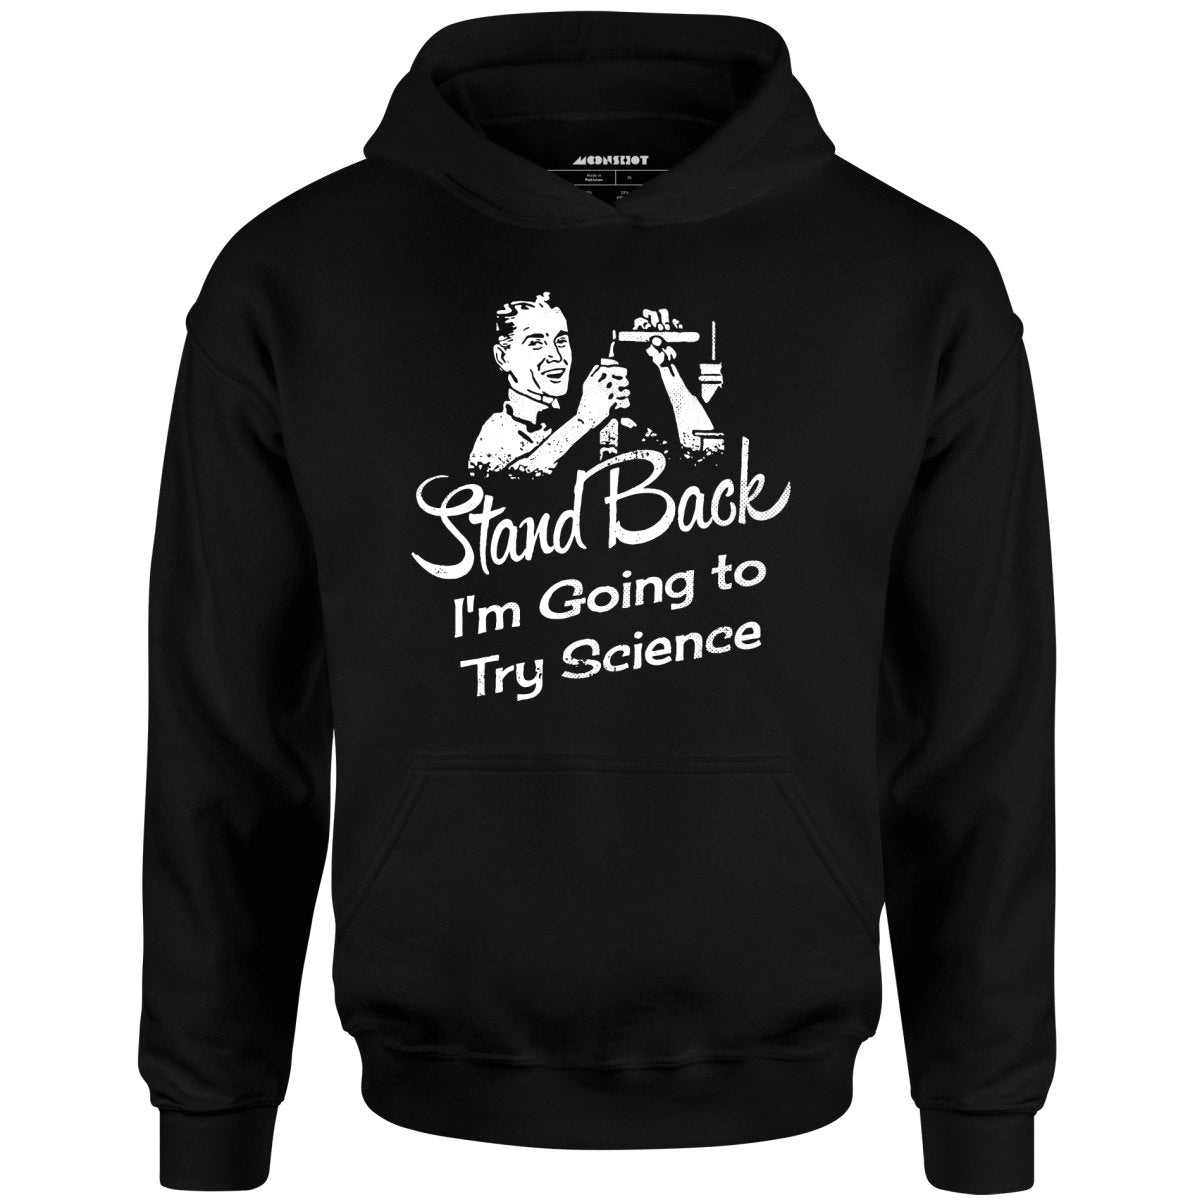 Stand Back I'm Going to Try Science - Unisex Hoodie